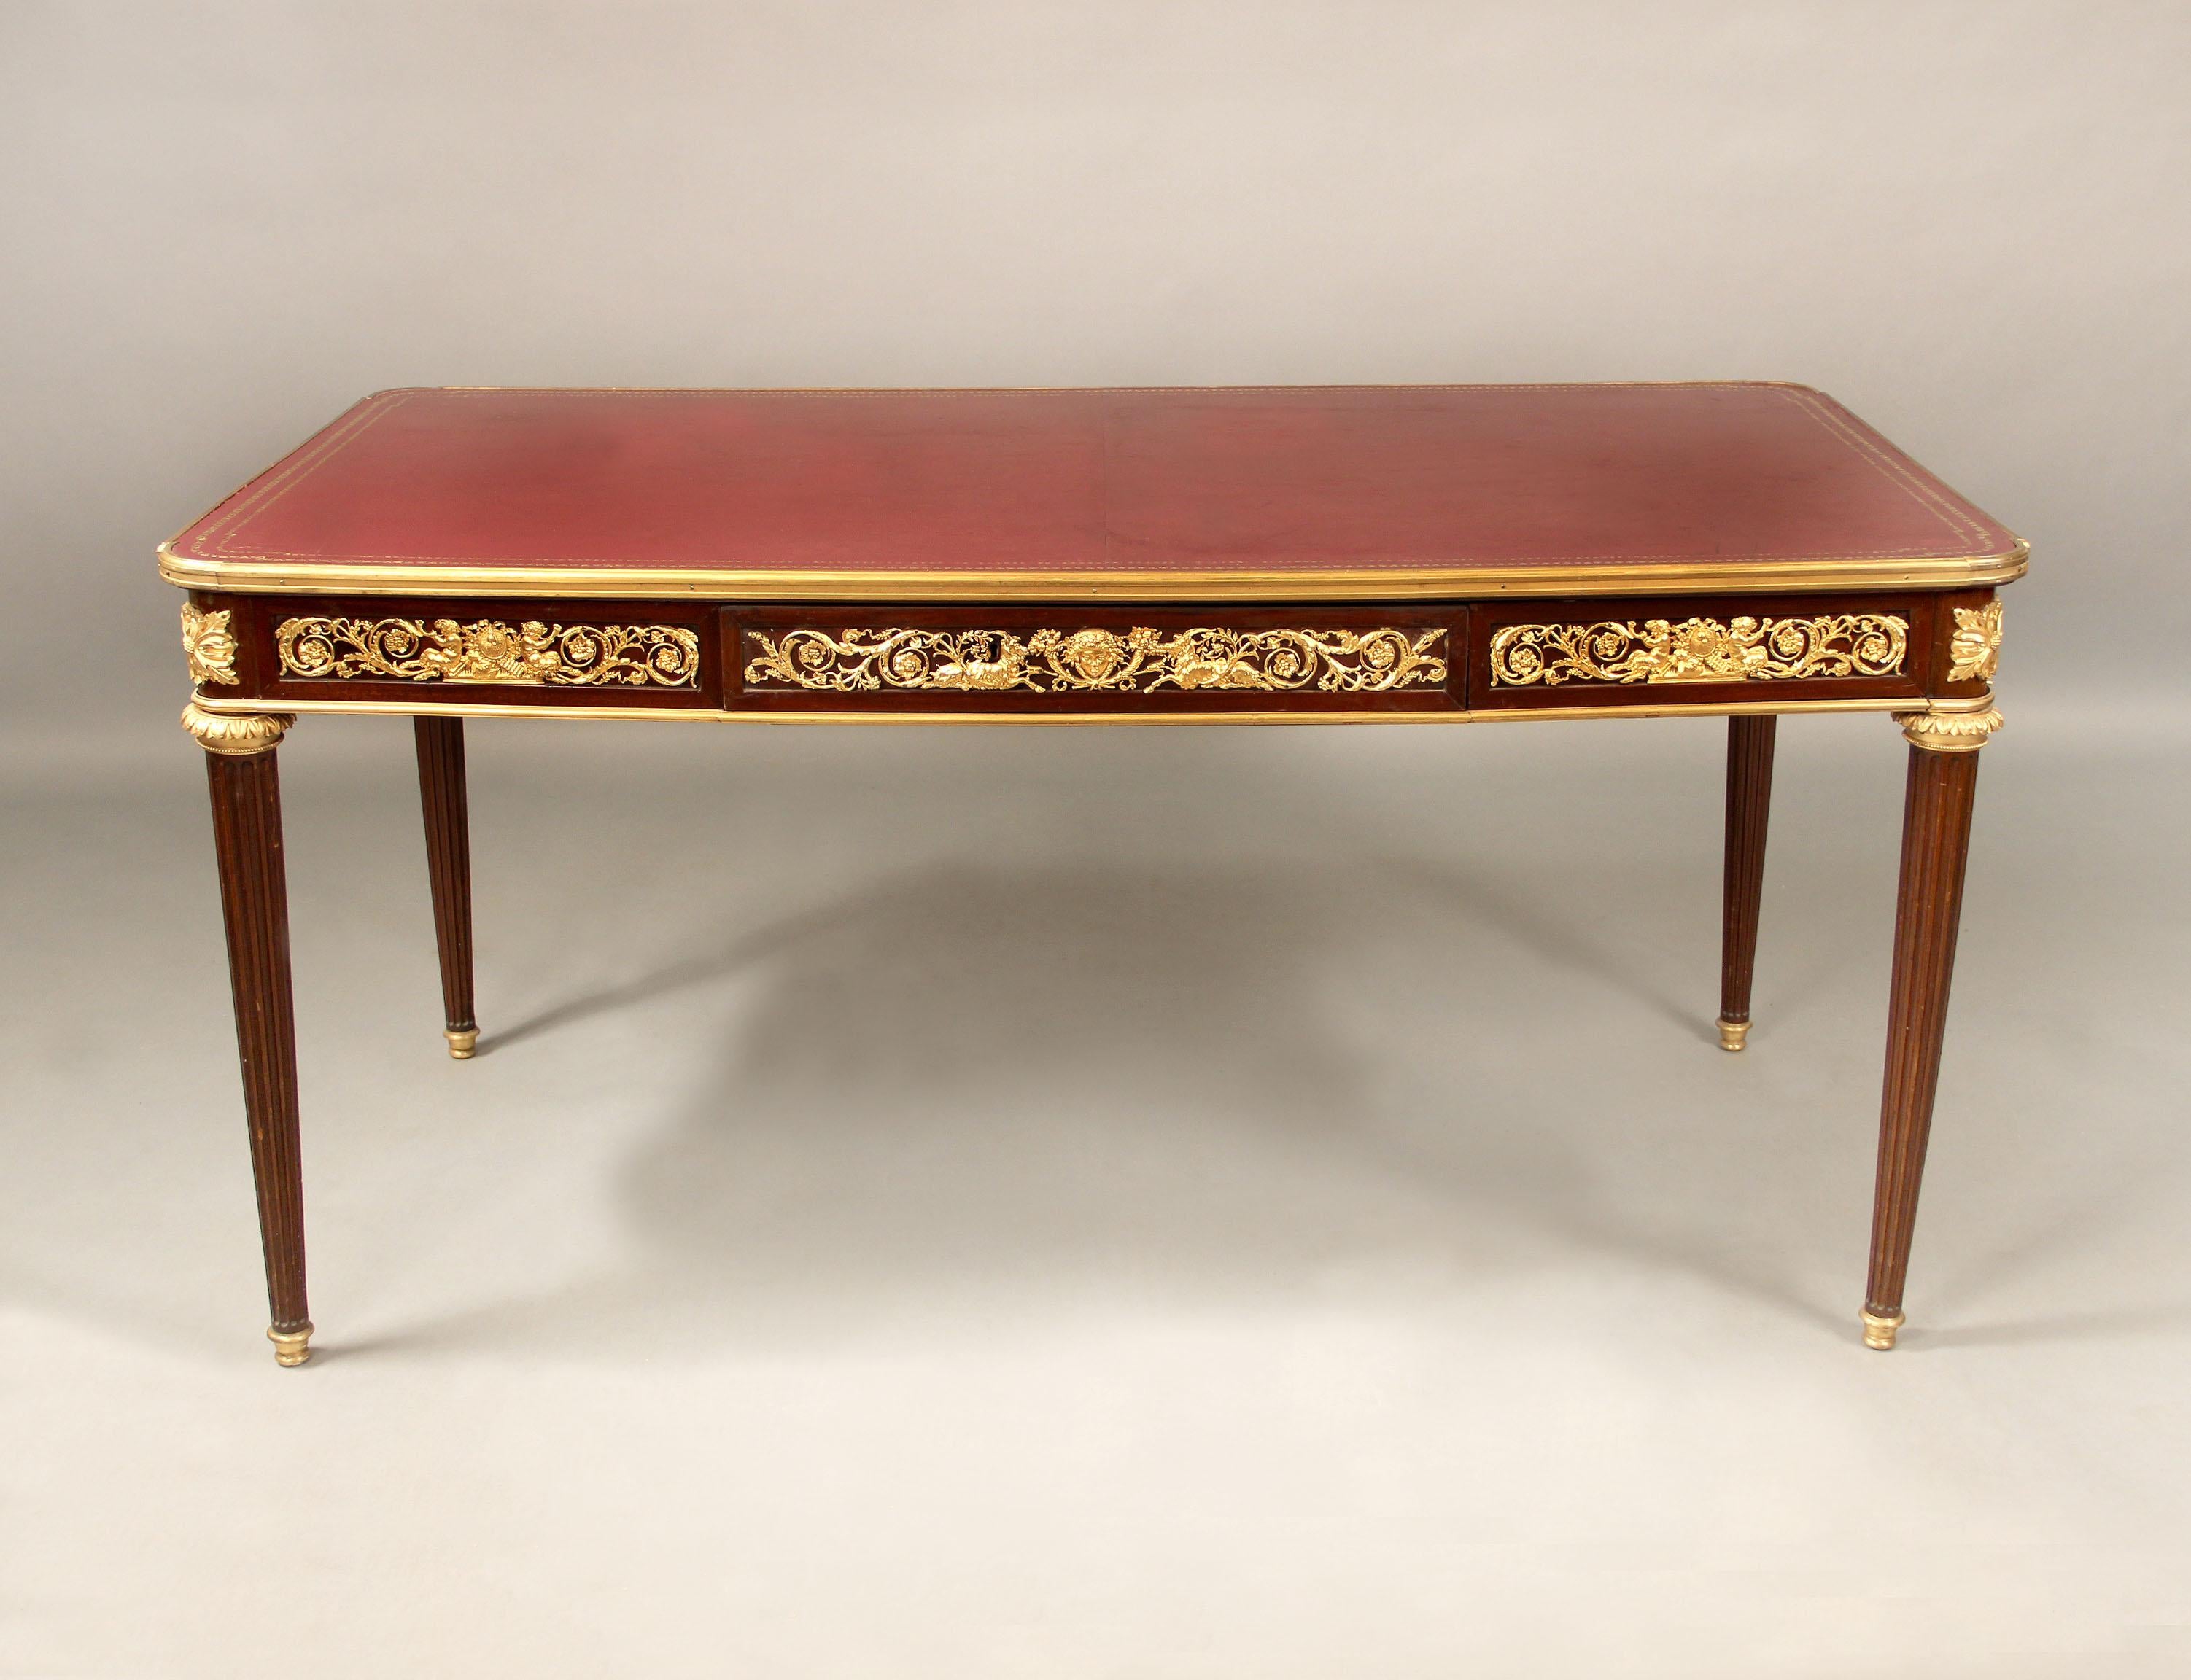 A Late 19th Century Gilt Bronze Mounted Louis XVI Style Desk

A leather top above a single bronze mounted drawer, centered bronze motif depicting a pair of rams centered by cornucopia and a maiden, surrounded by designs with satyrs and musical